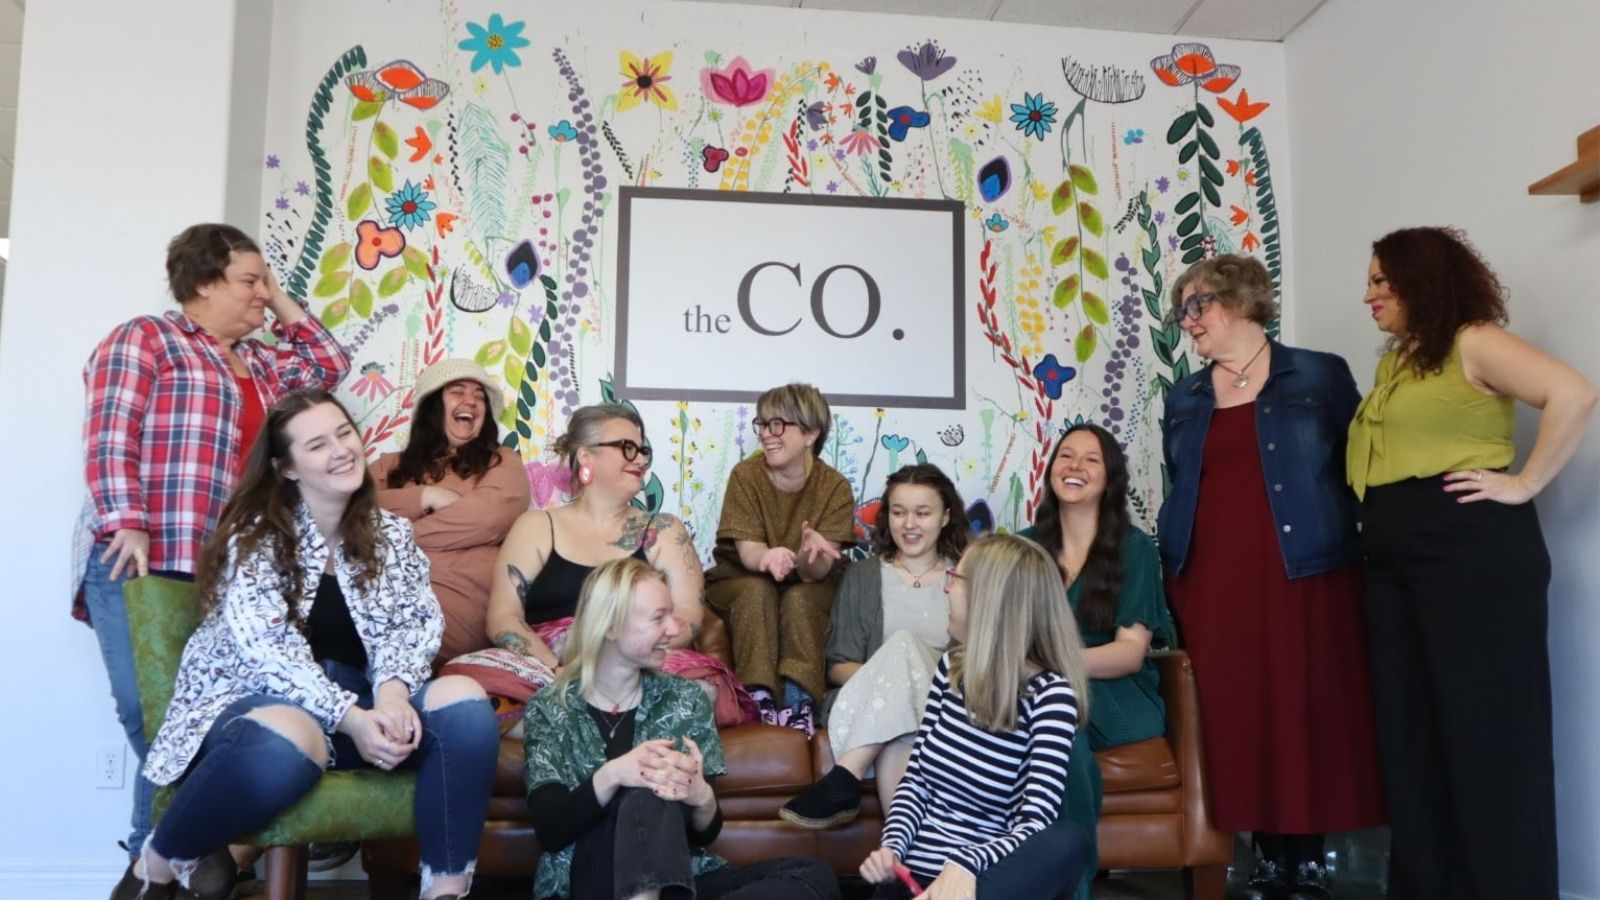 Women stand in front of a wall painted with colourful flowers and the words "the CO."